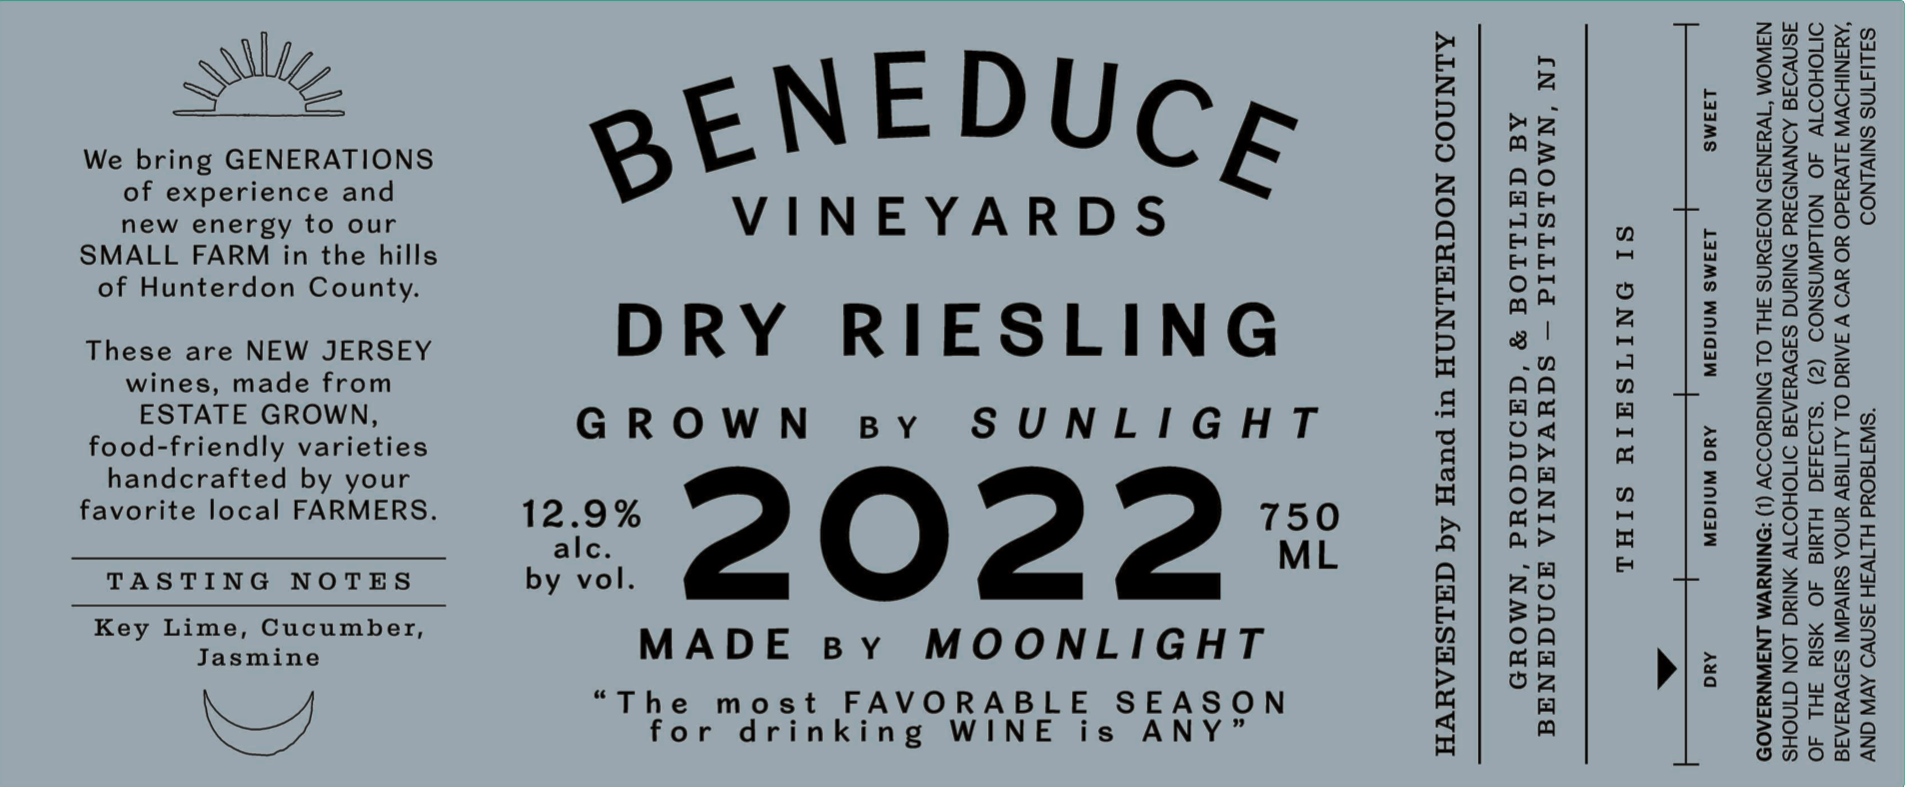 Product Image for 2022 Dry Riesling